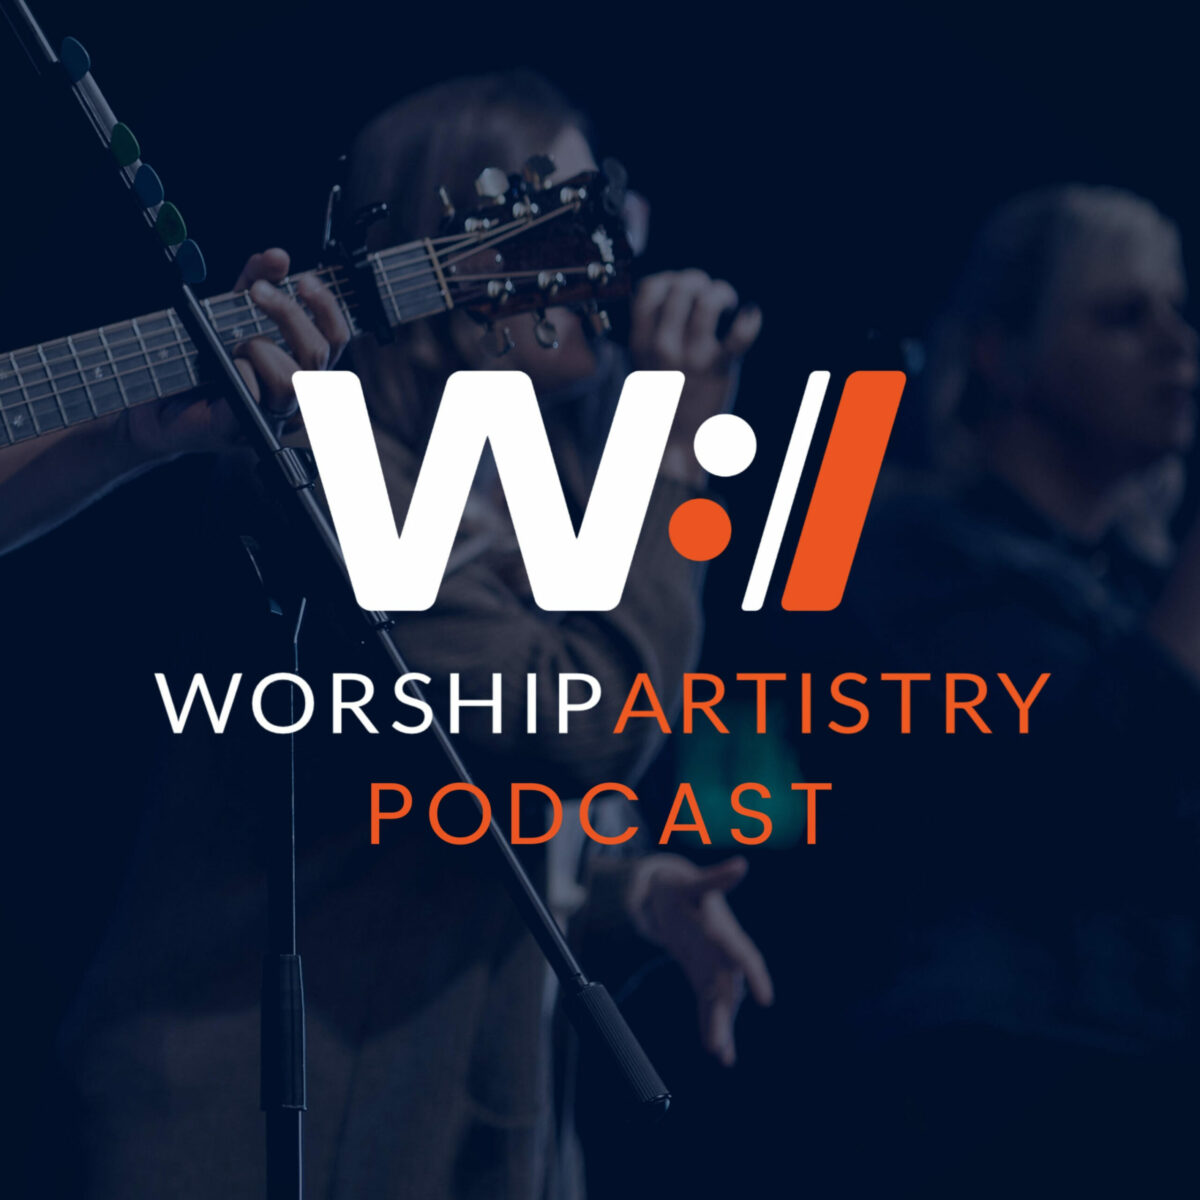 Worship Artistry Podcast Writing Songs for the Table with Erik Gaylo